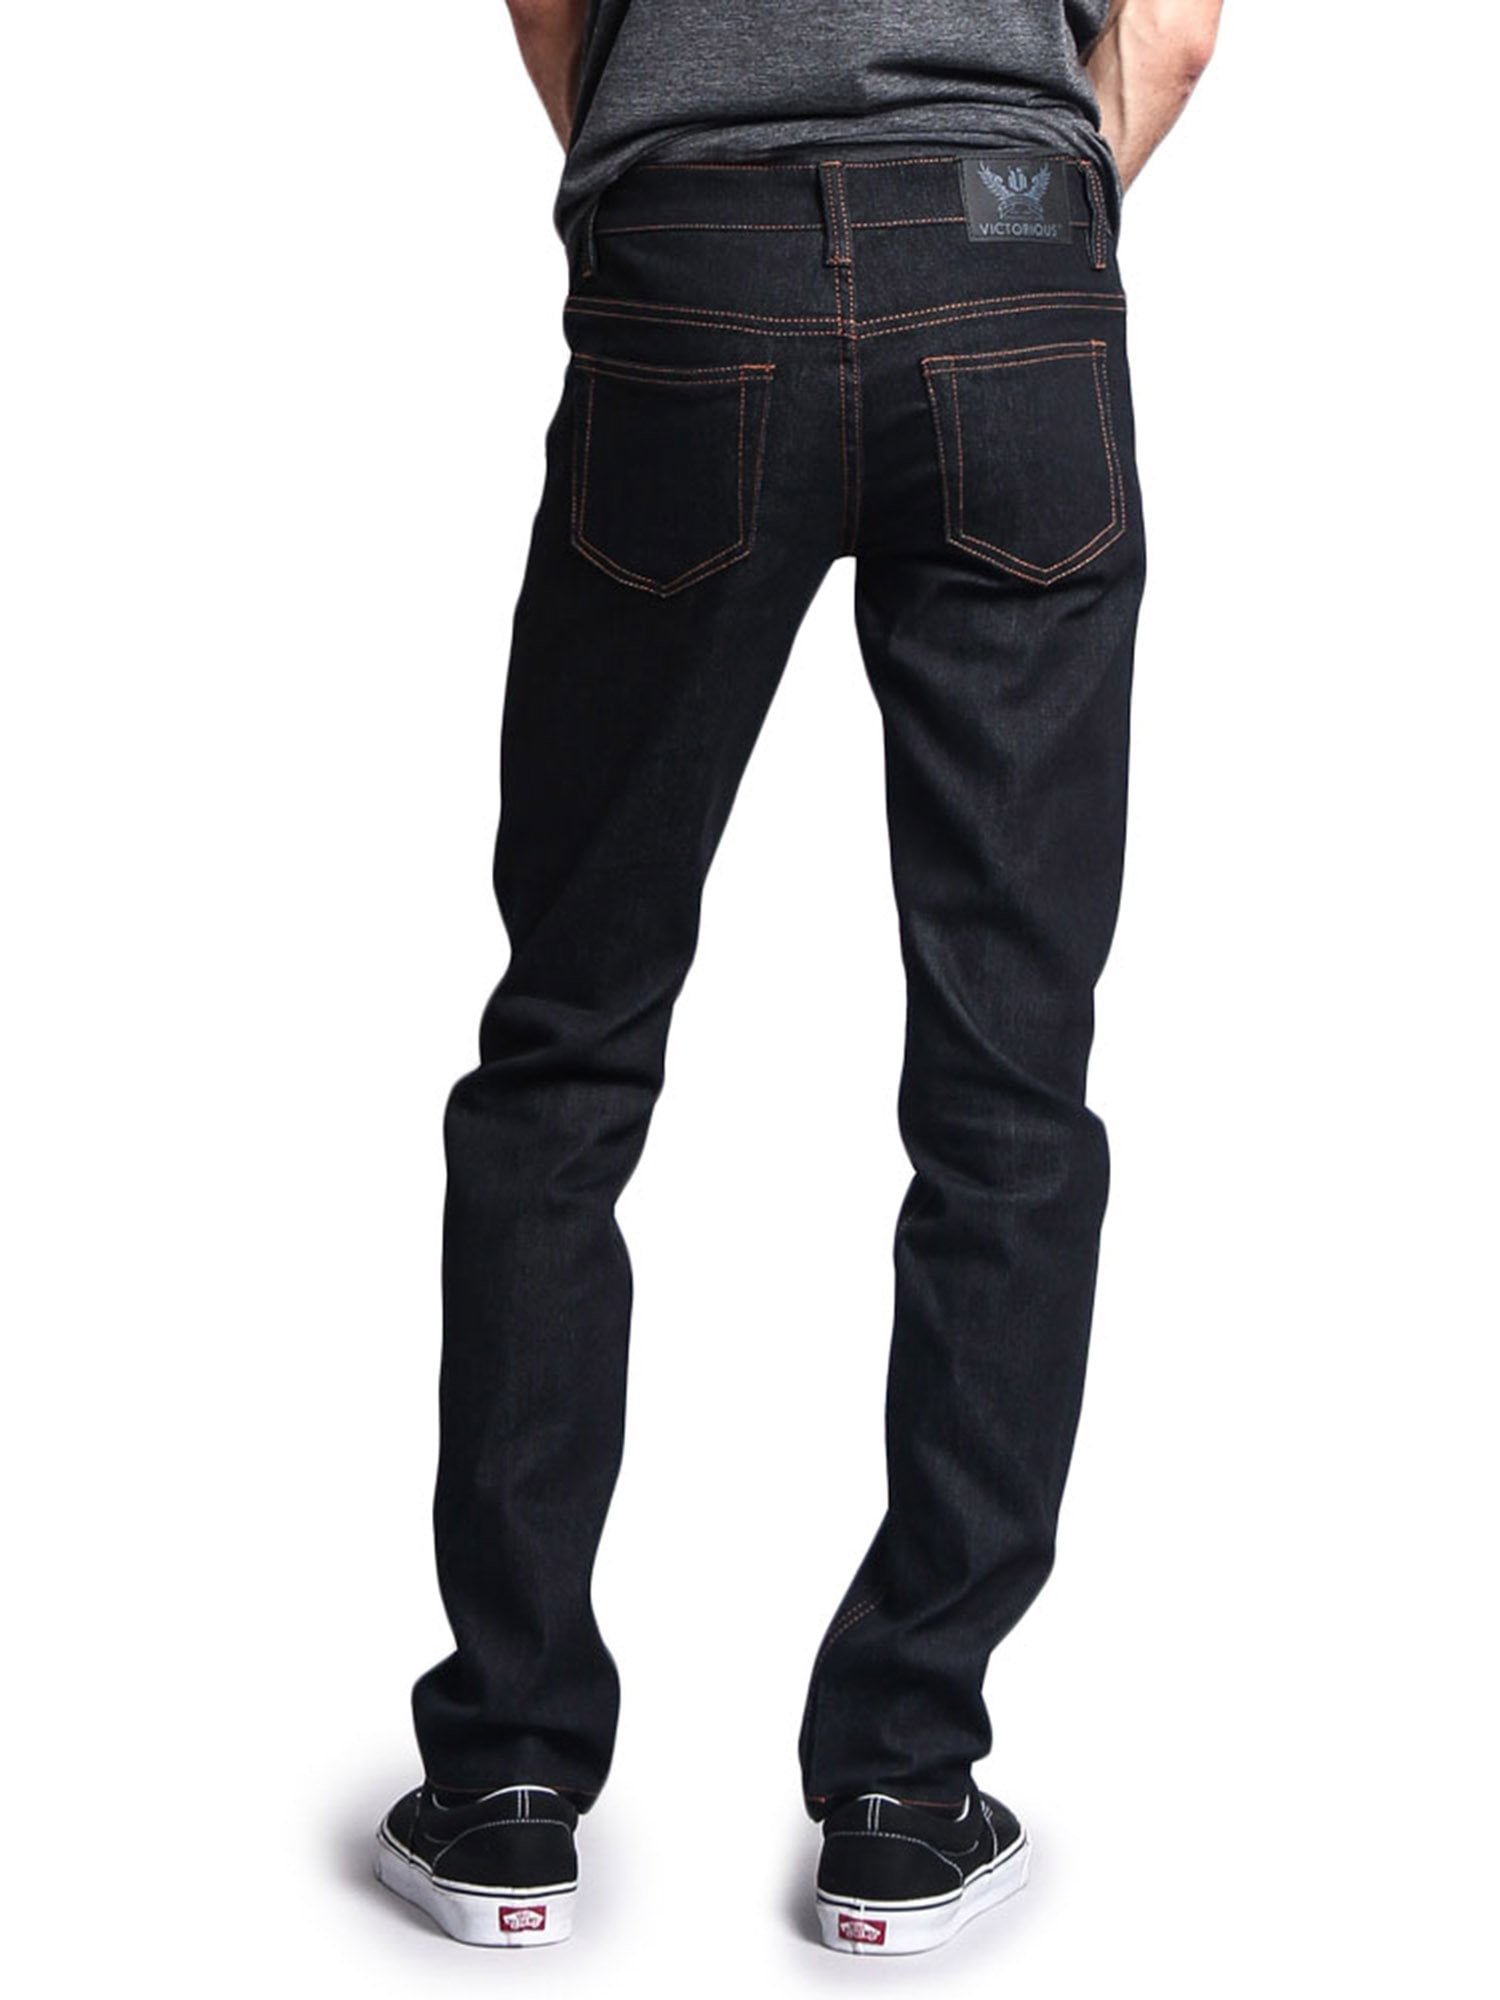 Victorious Men's Skinny Fit Unwashed Raw Denim Jeans DL938 - Indigo/Timber  - 40/30